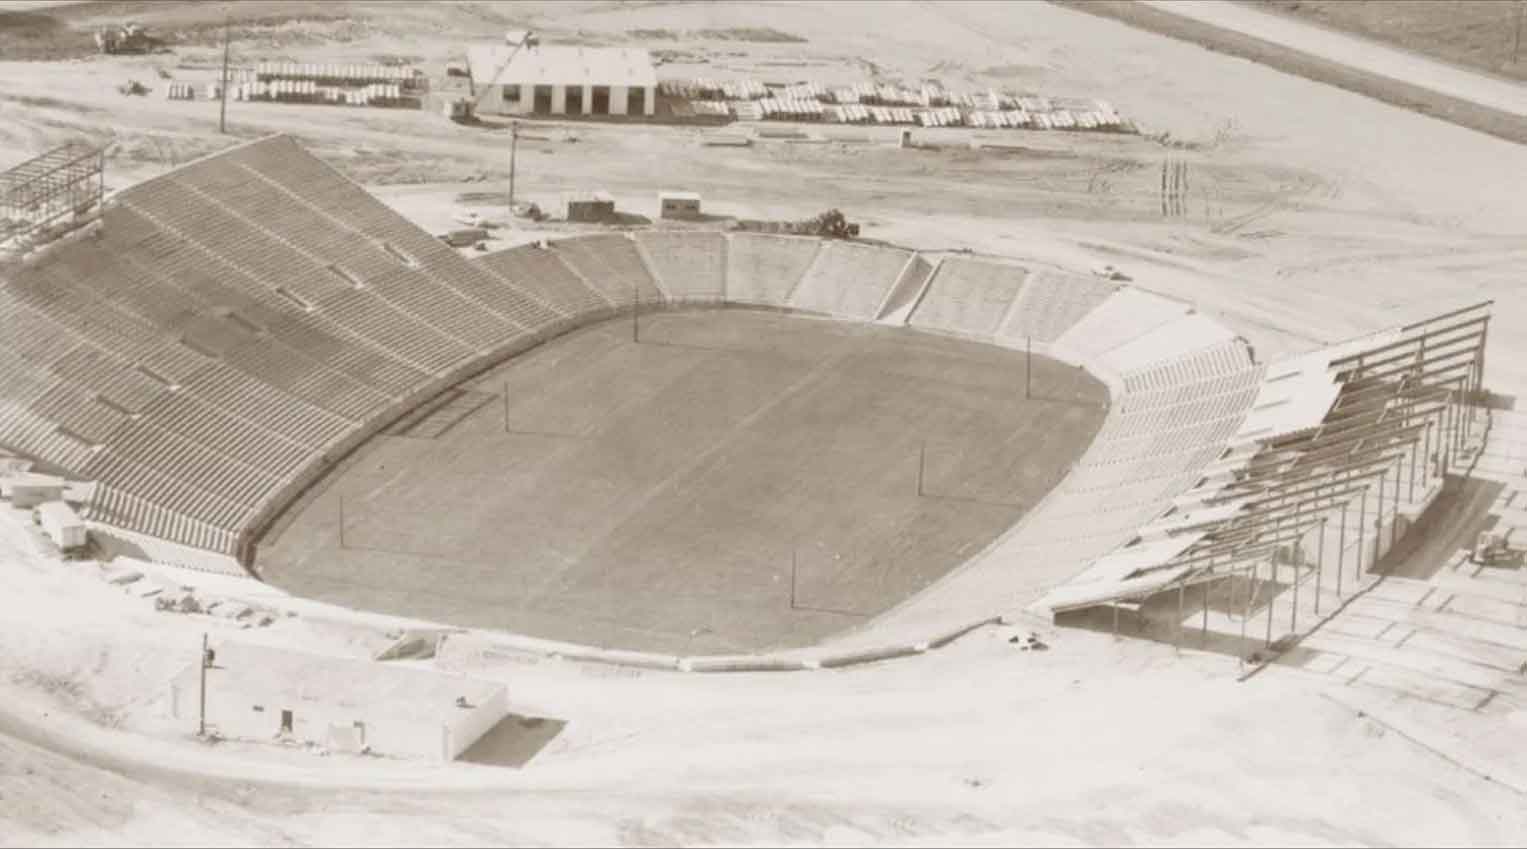 Packers Stadium Lambeau Field Initial-First While The Stadium is Being Built (1957 Historical Photo), Source: Packers.com